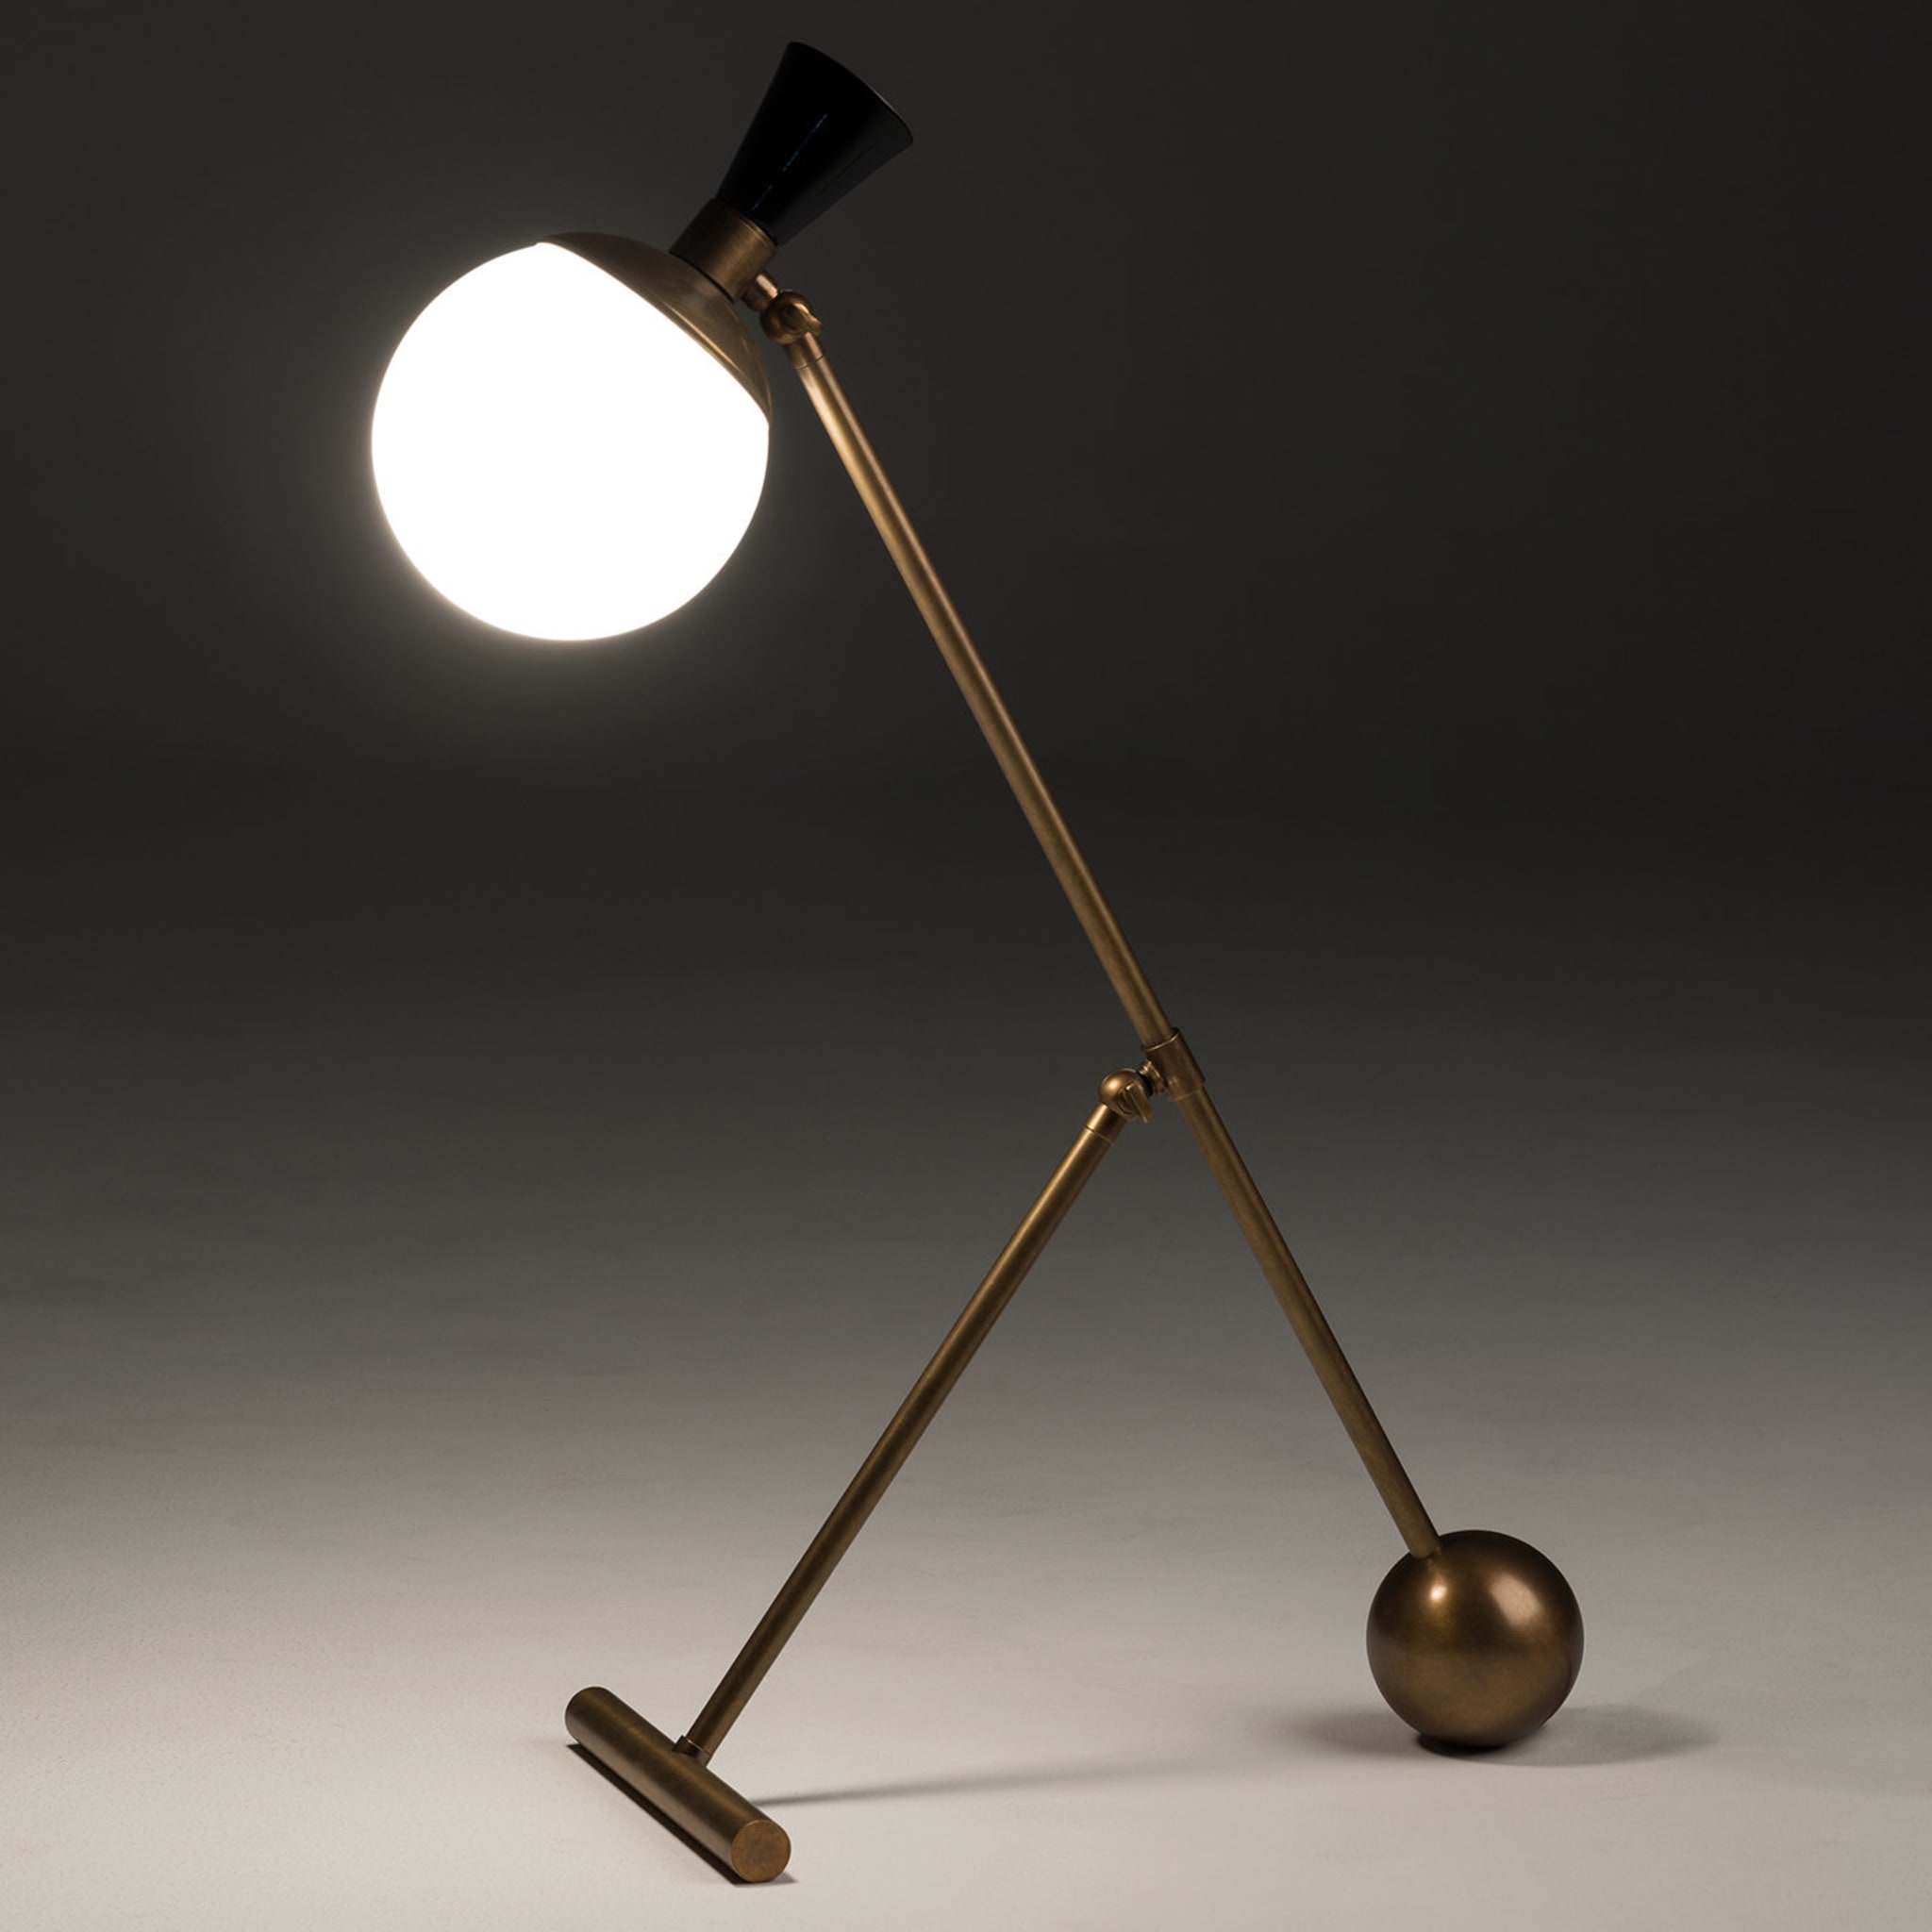 Igloo Desk Lamp Tribeca Collection by Marco and Giulio Mantellassi - Alternative view 1